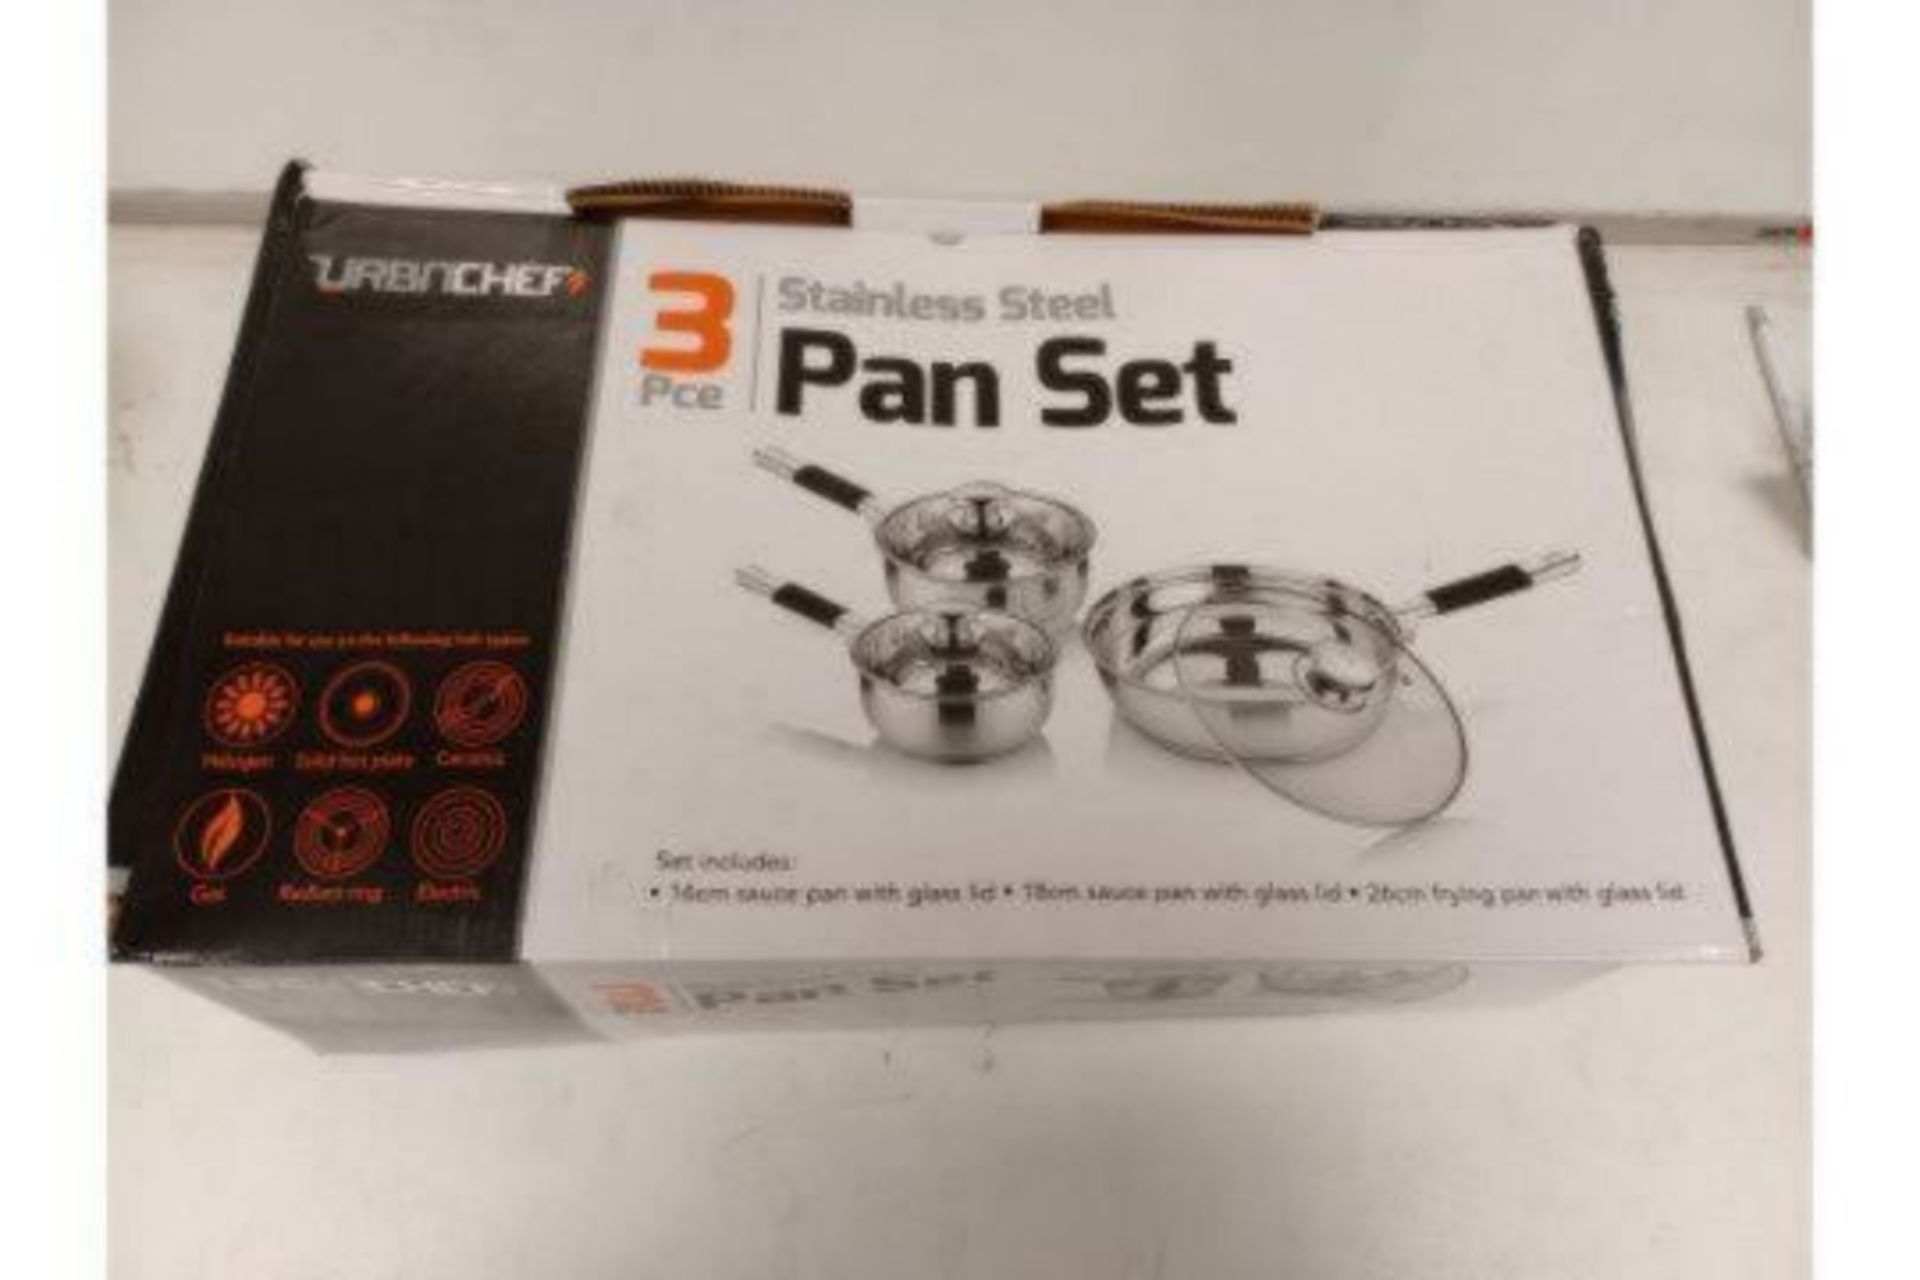 2 X BOXED SETS OF URBNCHEF 3 PIECE STAINLESS STEEL PAN SETS. EACH SET INCLUDES: 16CM SAUCE PAN